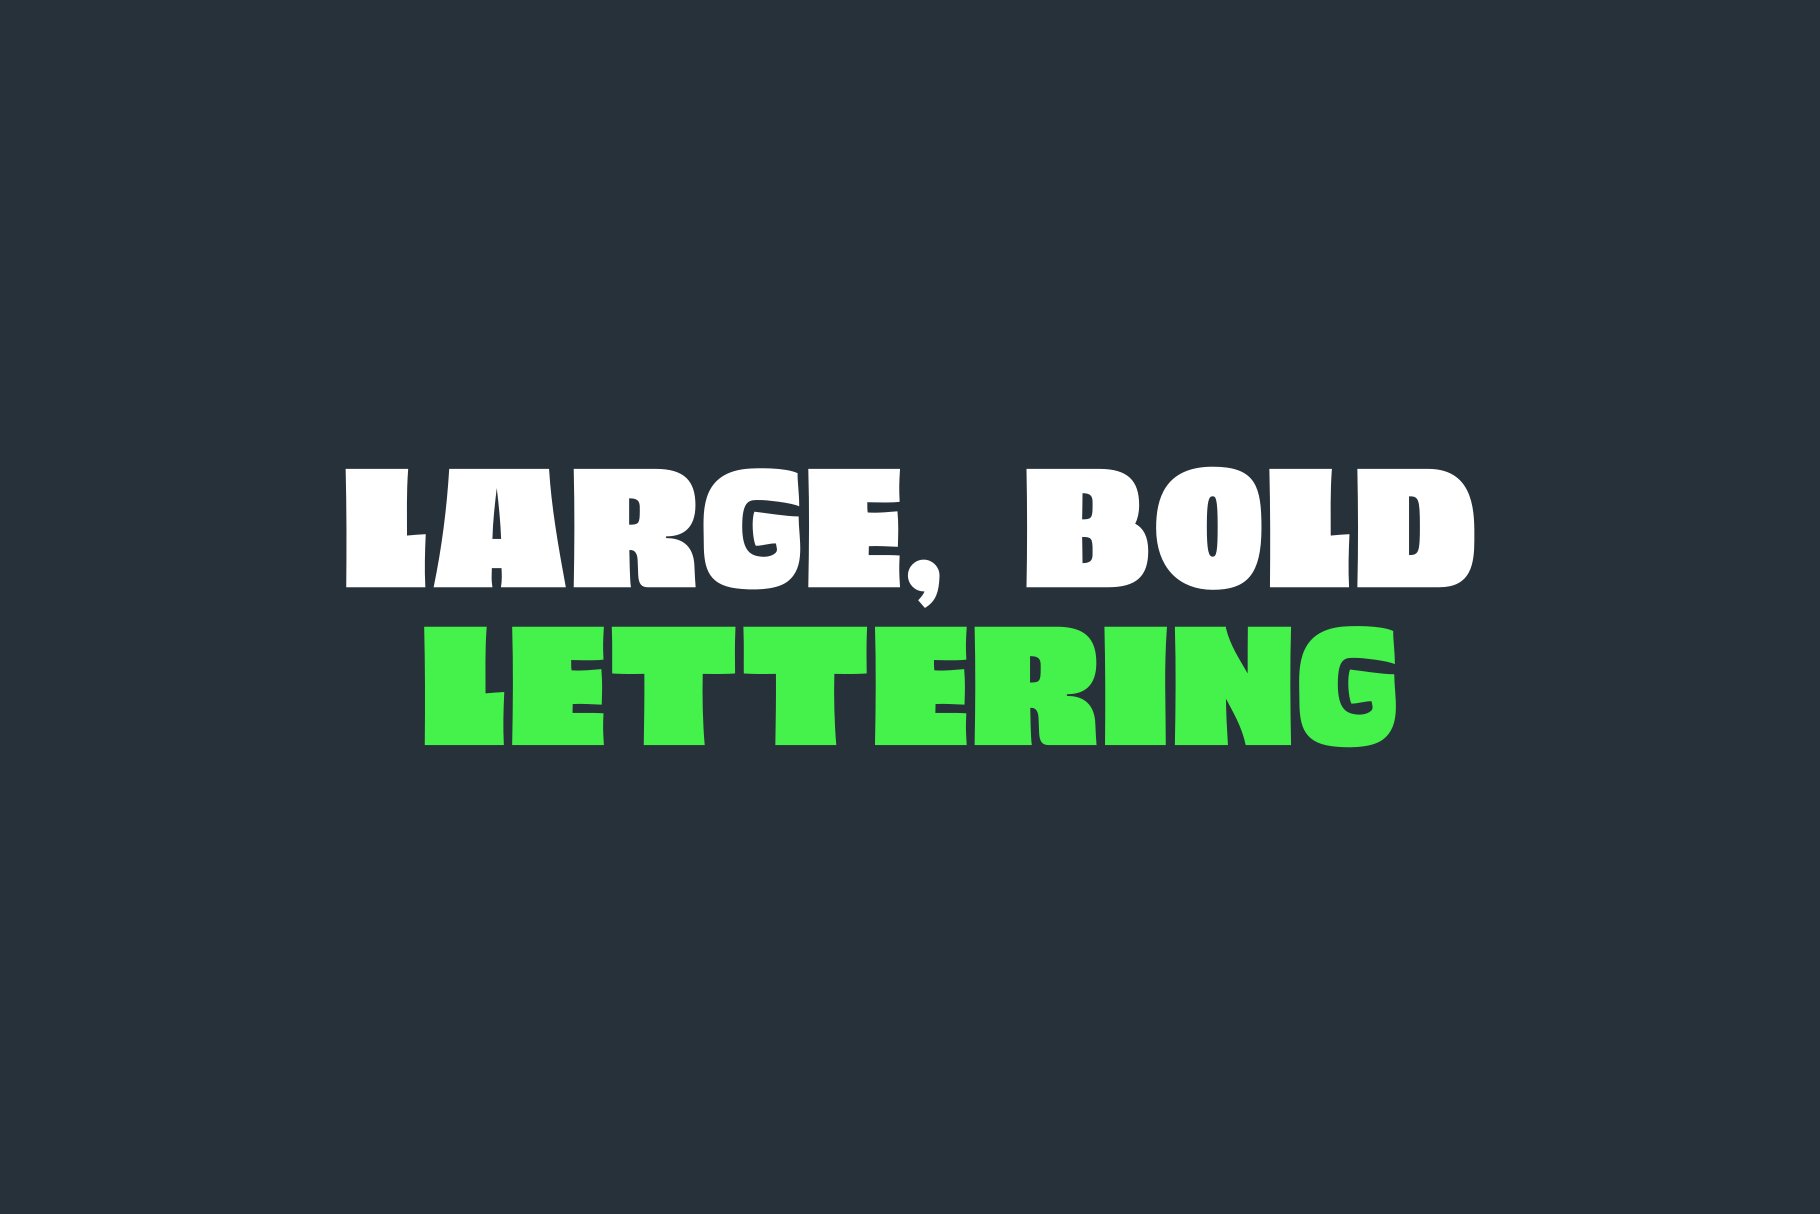 A black background with a green and white lettering that says large.